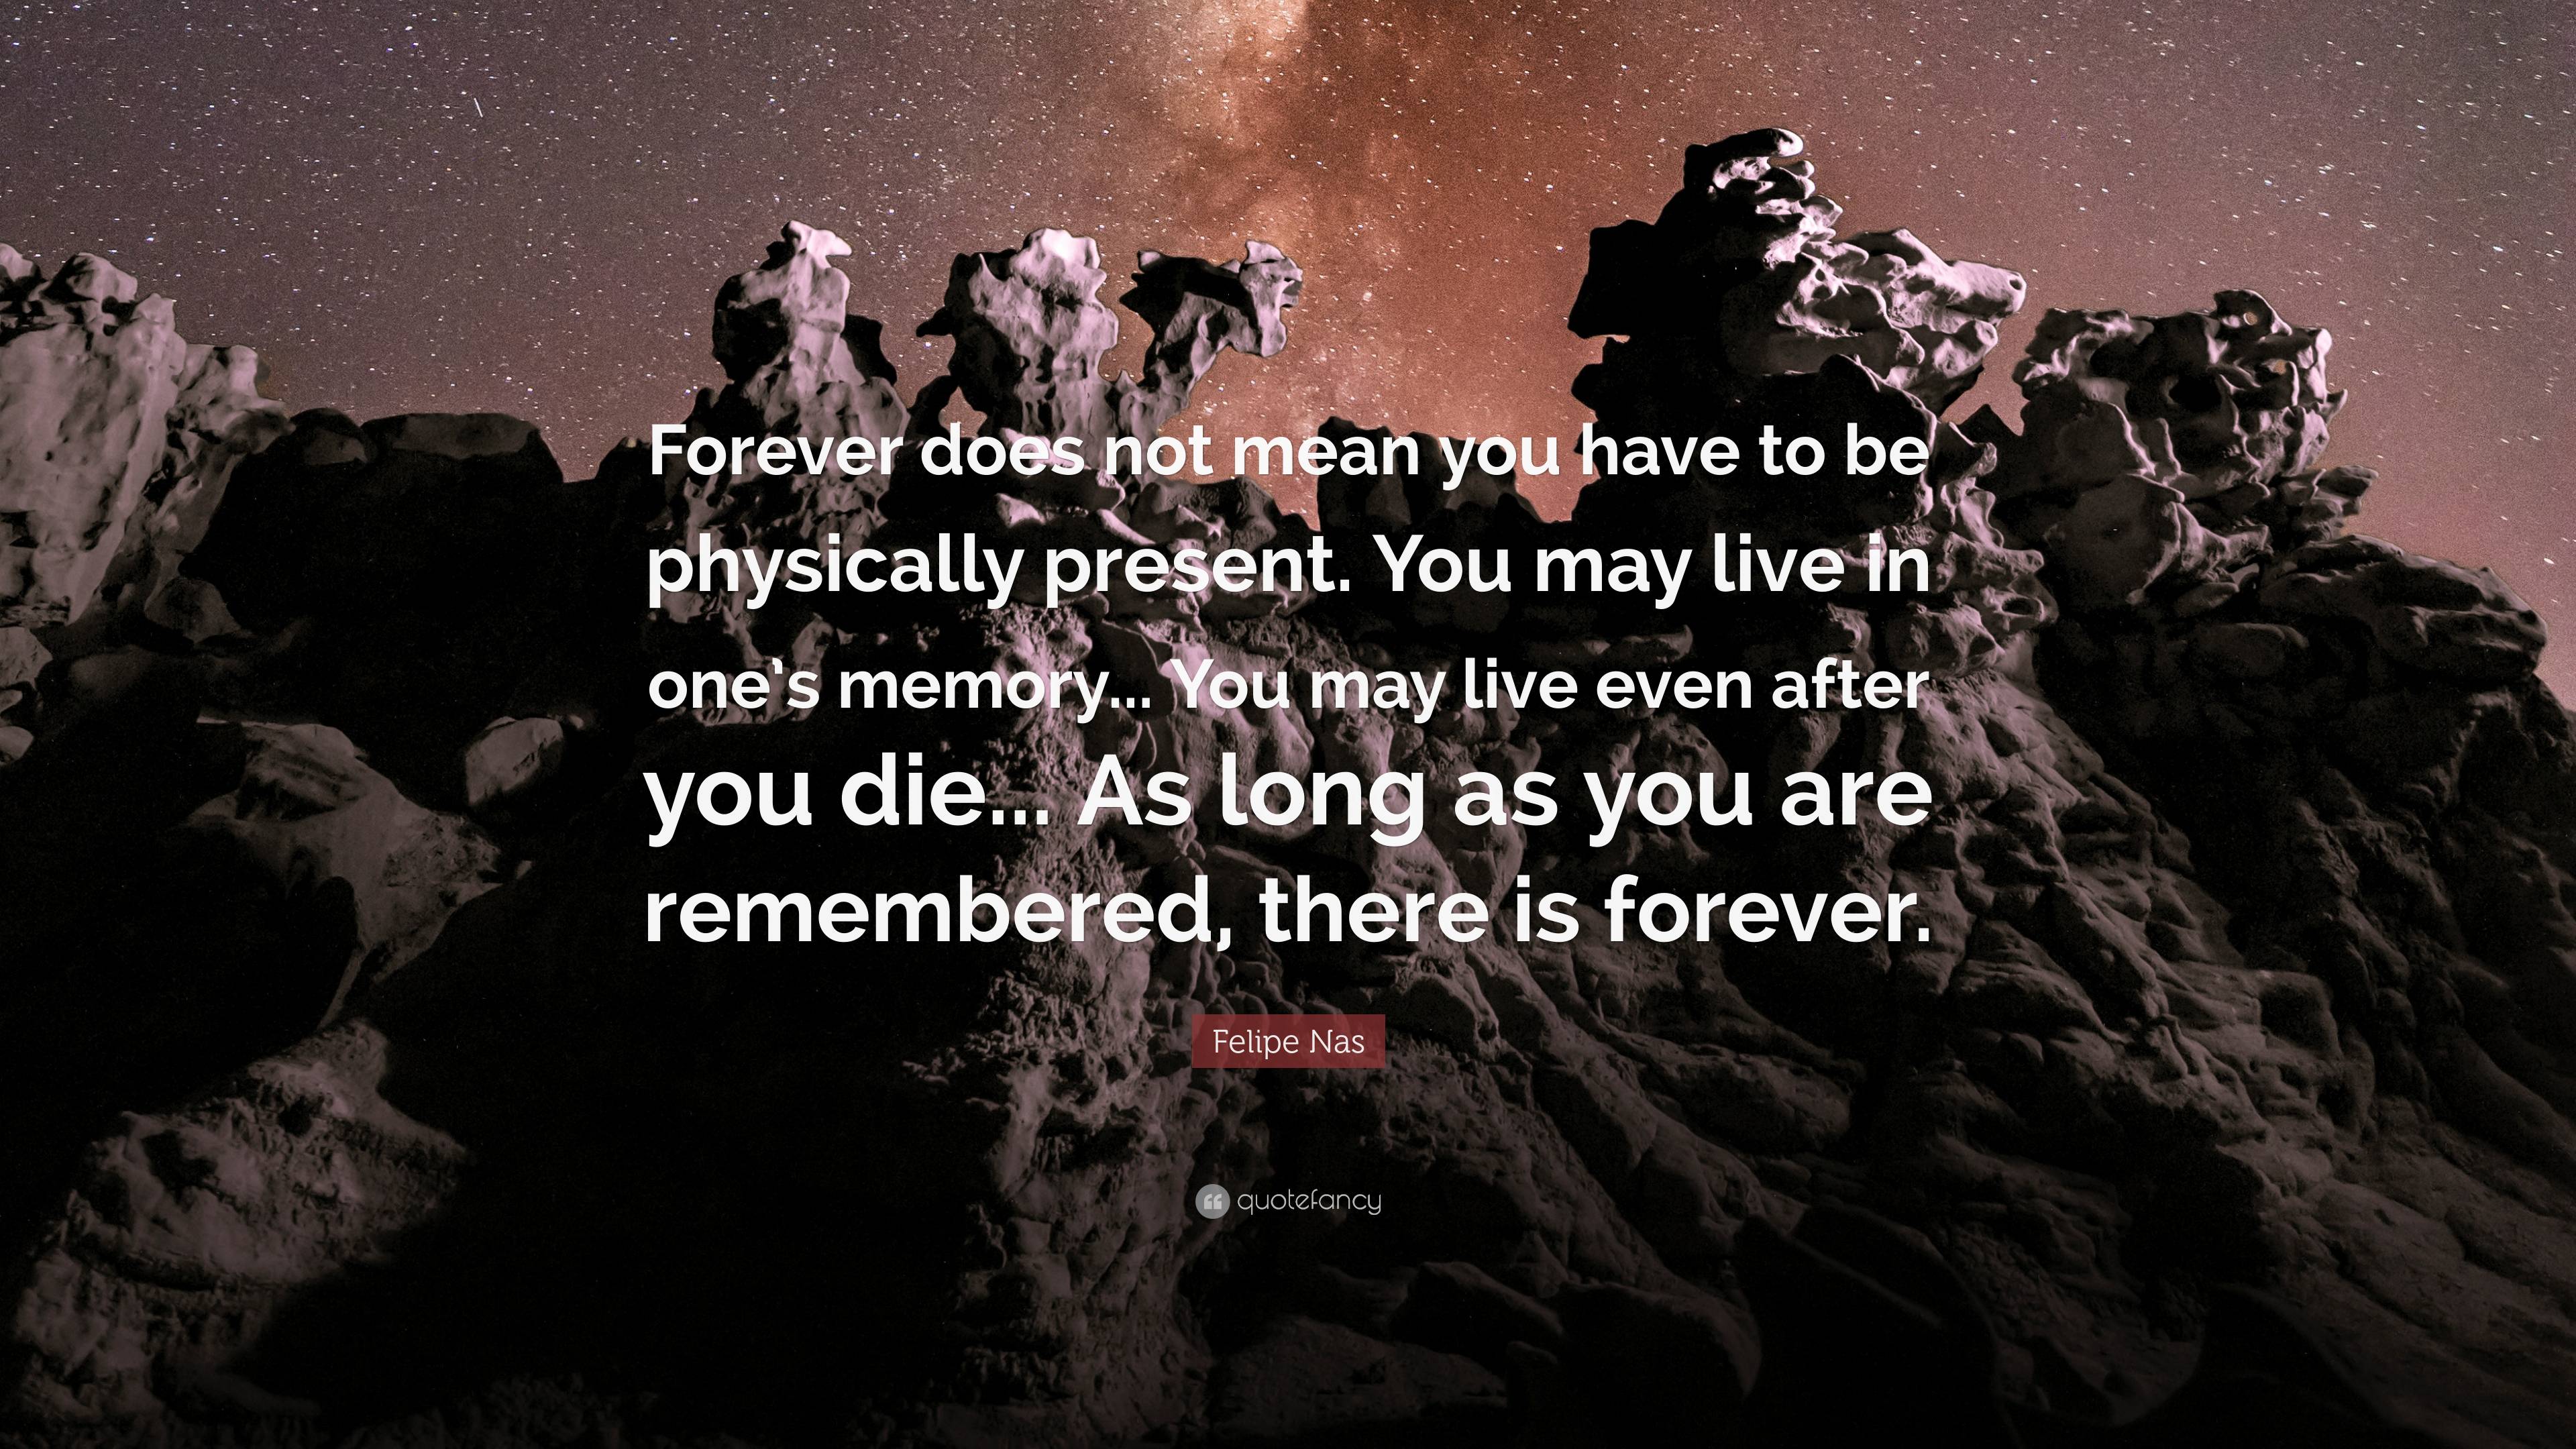 What Physically Happens When You Die?